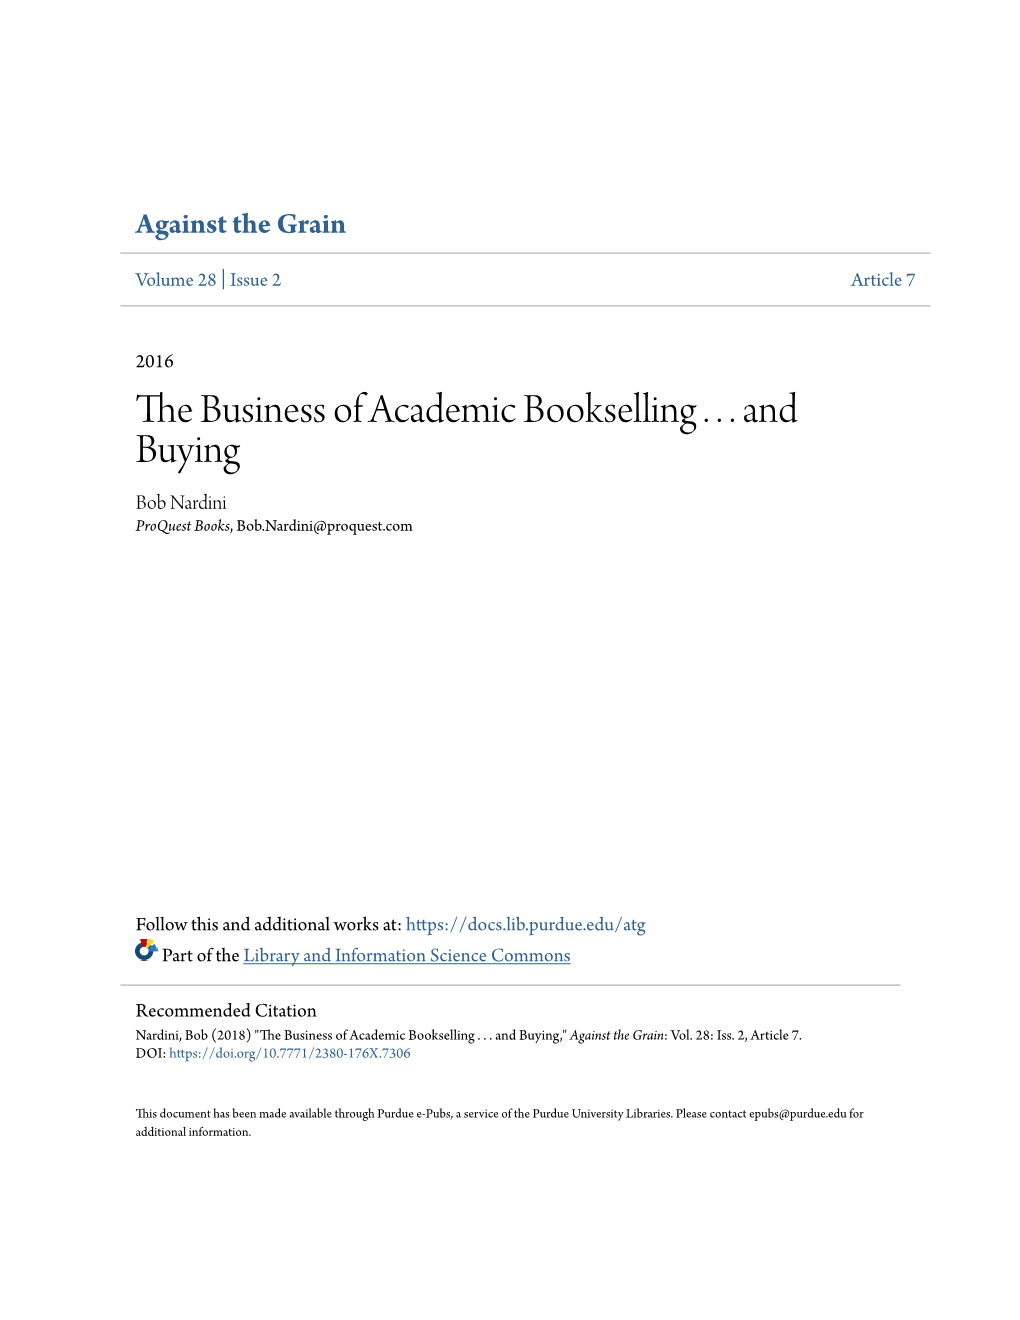 The Business of Academic Bookselling . . . and Buying